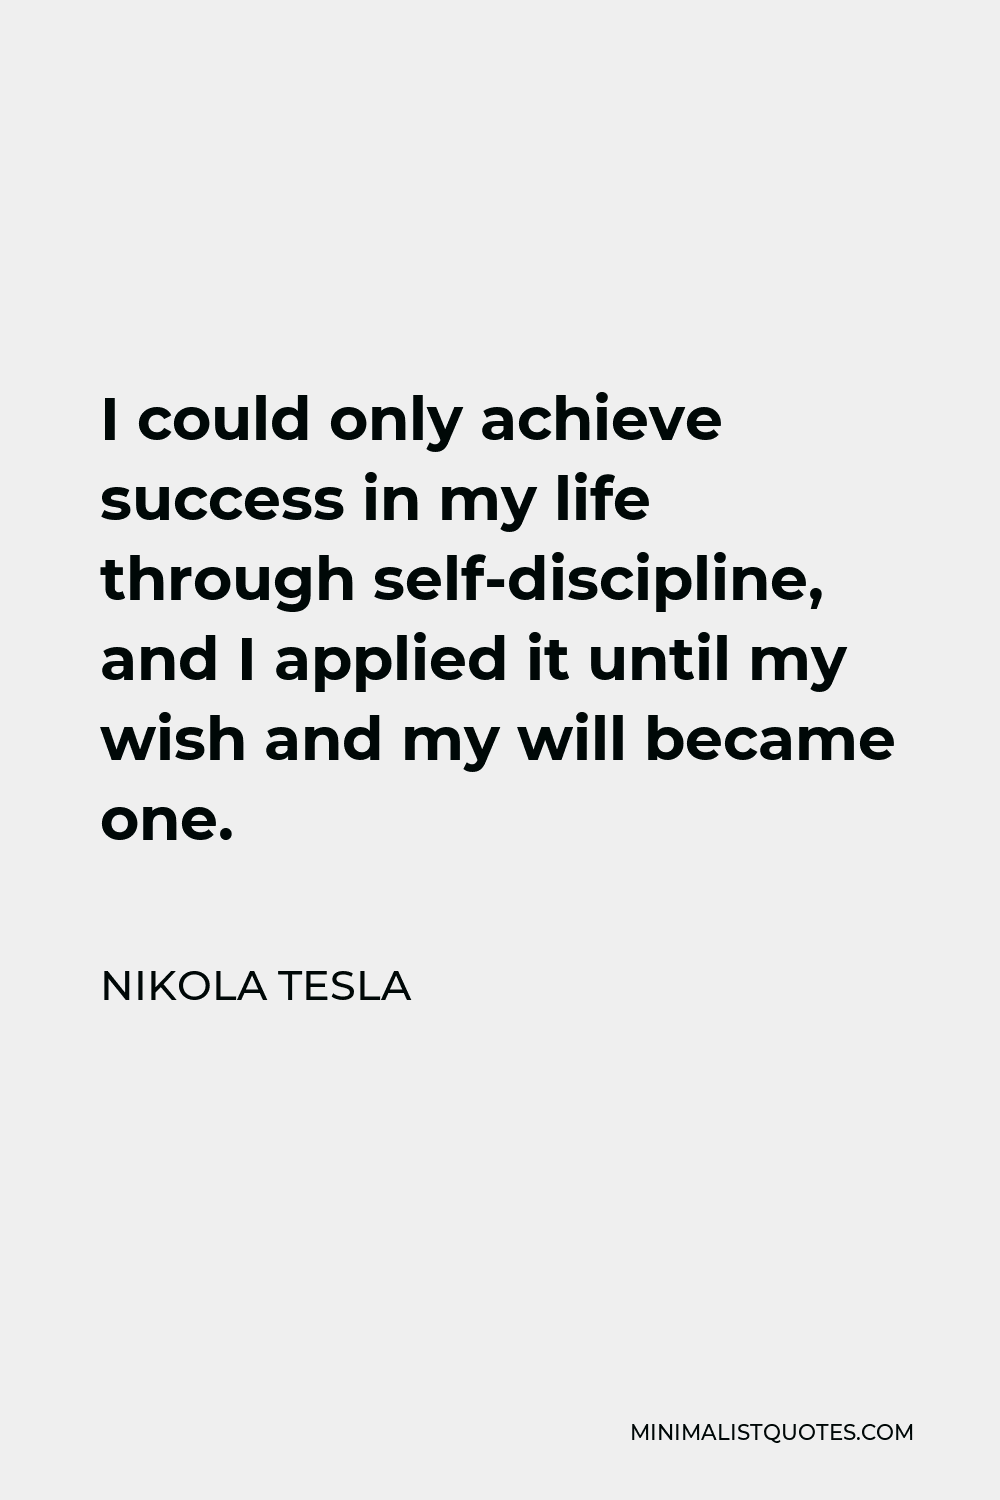 Nikola Tesla Quote - I could only achieve success in my life through self-discipline, and I applied it until my wish and my will became one.